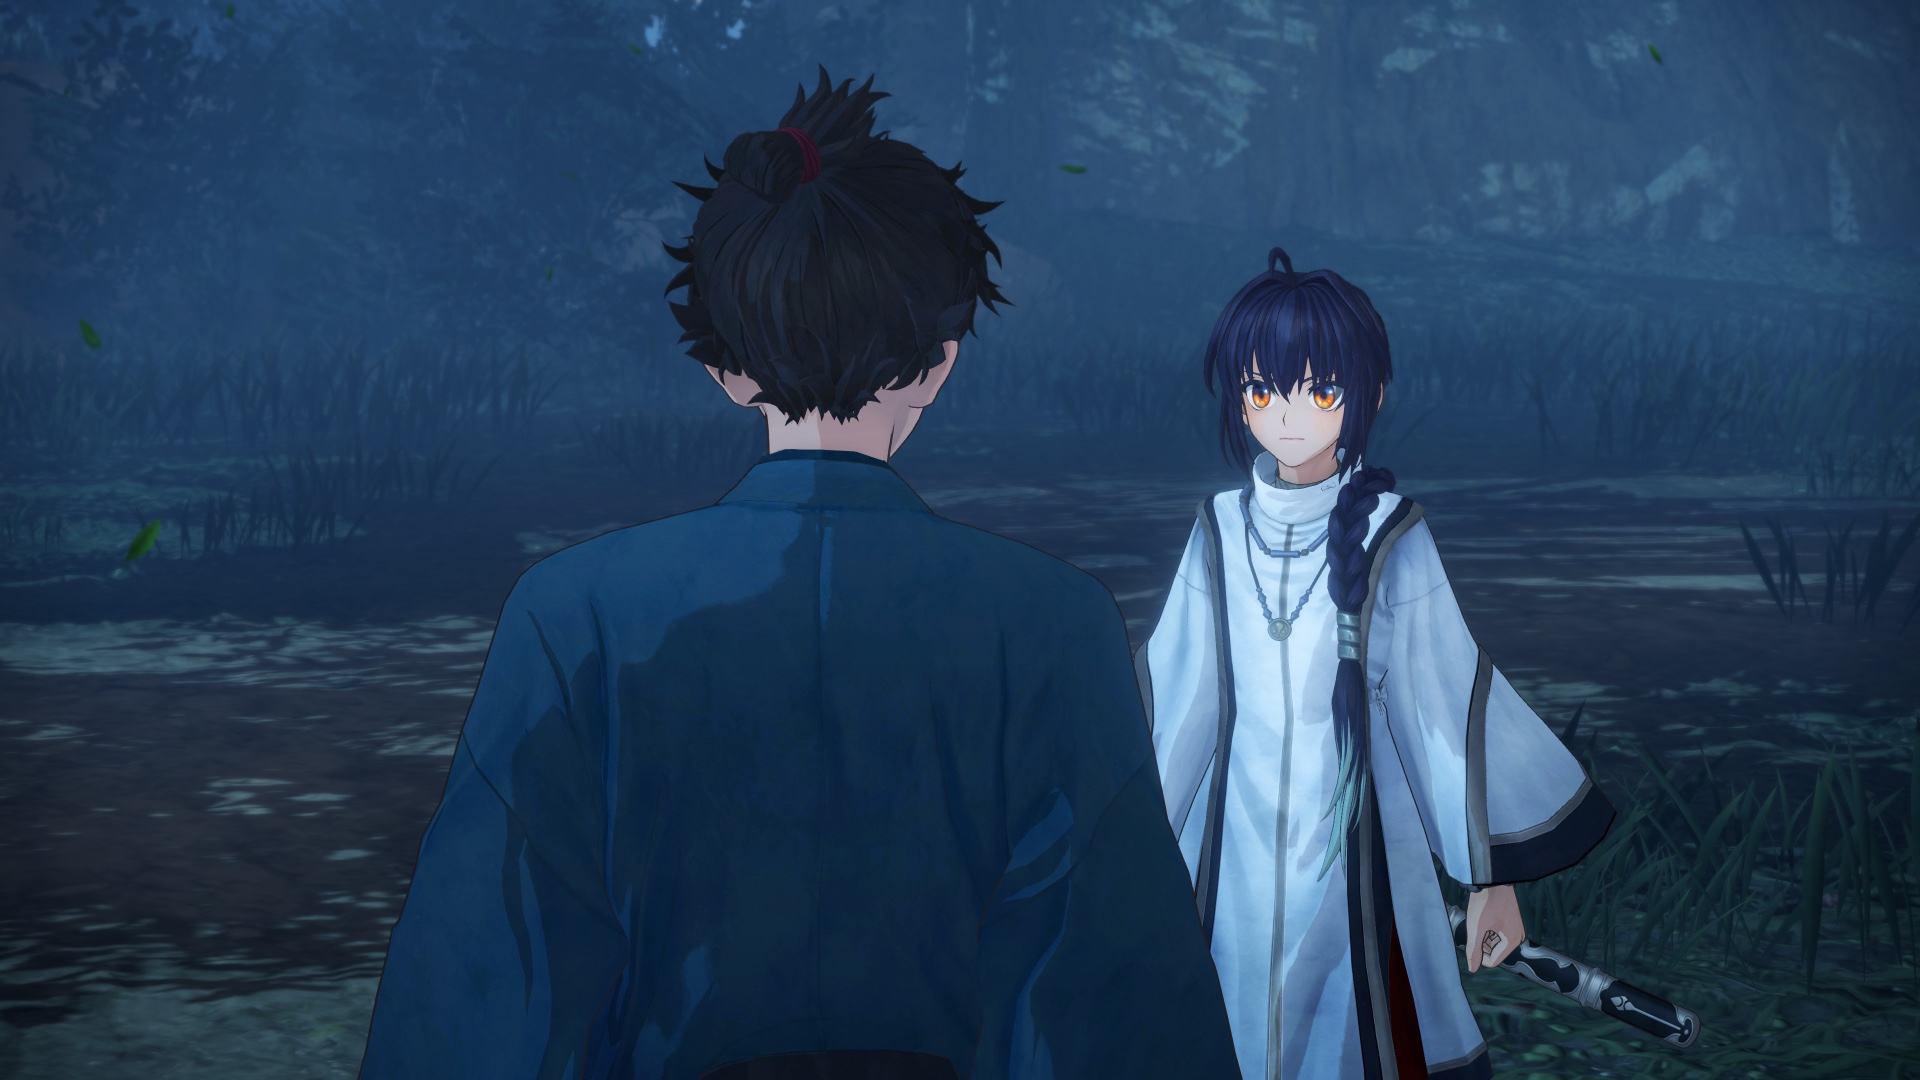 Fate/Samurai Remnant Interview – Director Ryota Matsushita on Working With the Fate IP, the Steam Deck, Learnings From Prior Games, His Dream Action RPG Projects, and More